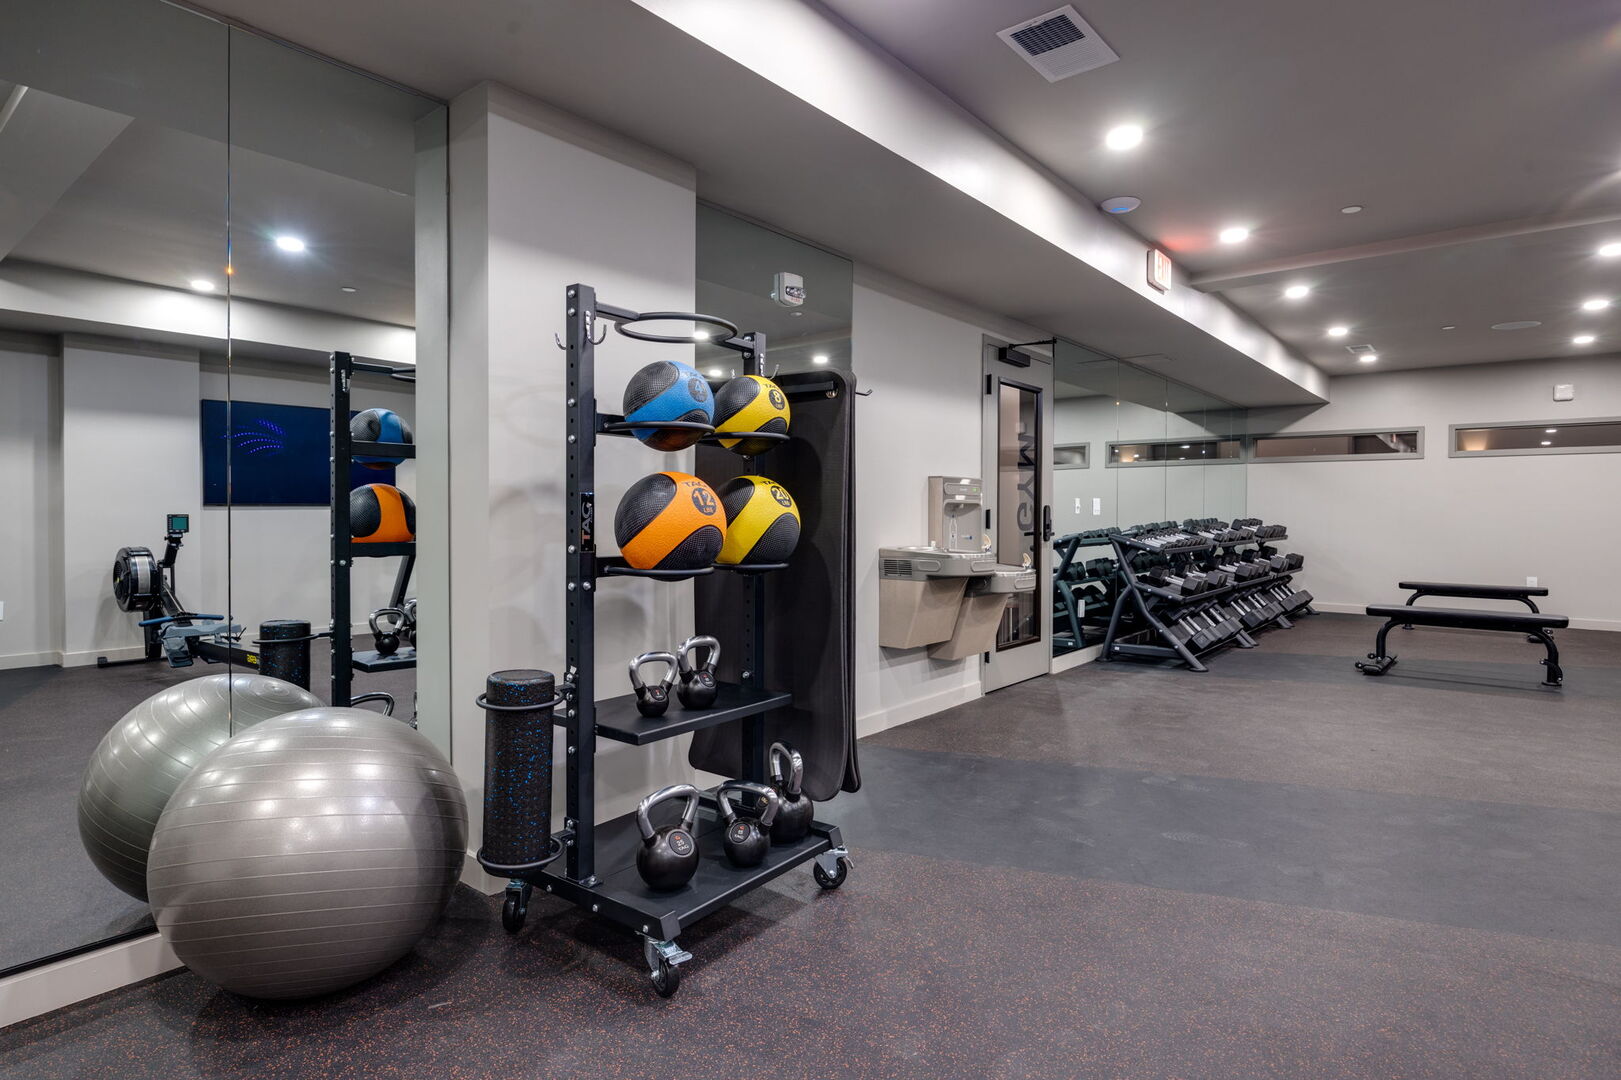 Communal Area: Gym offering a wide range of workout equipment, and a Smart TV.